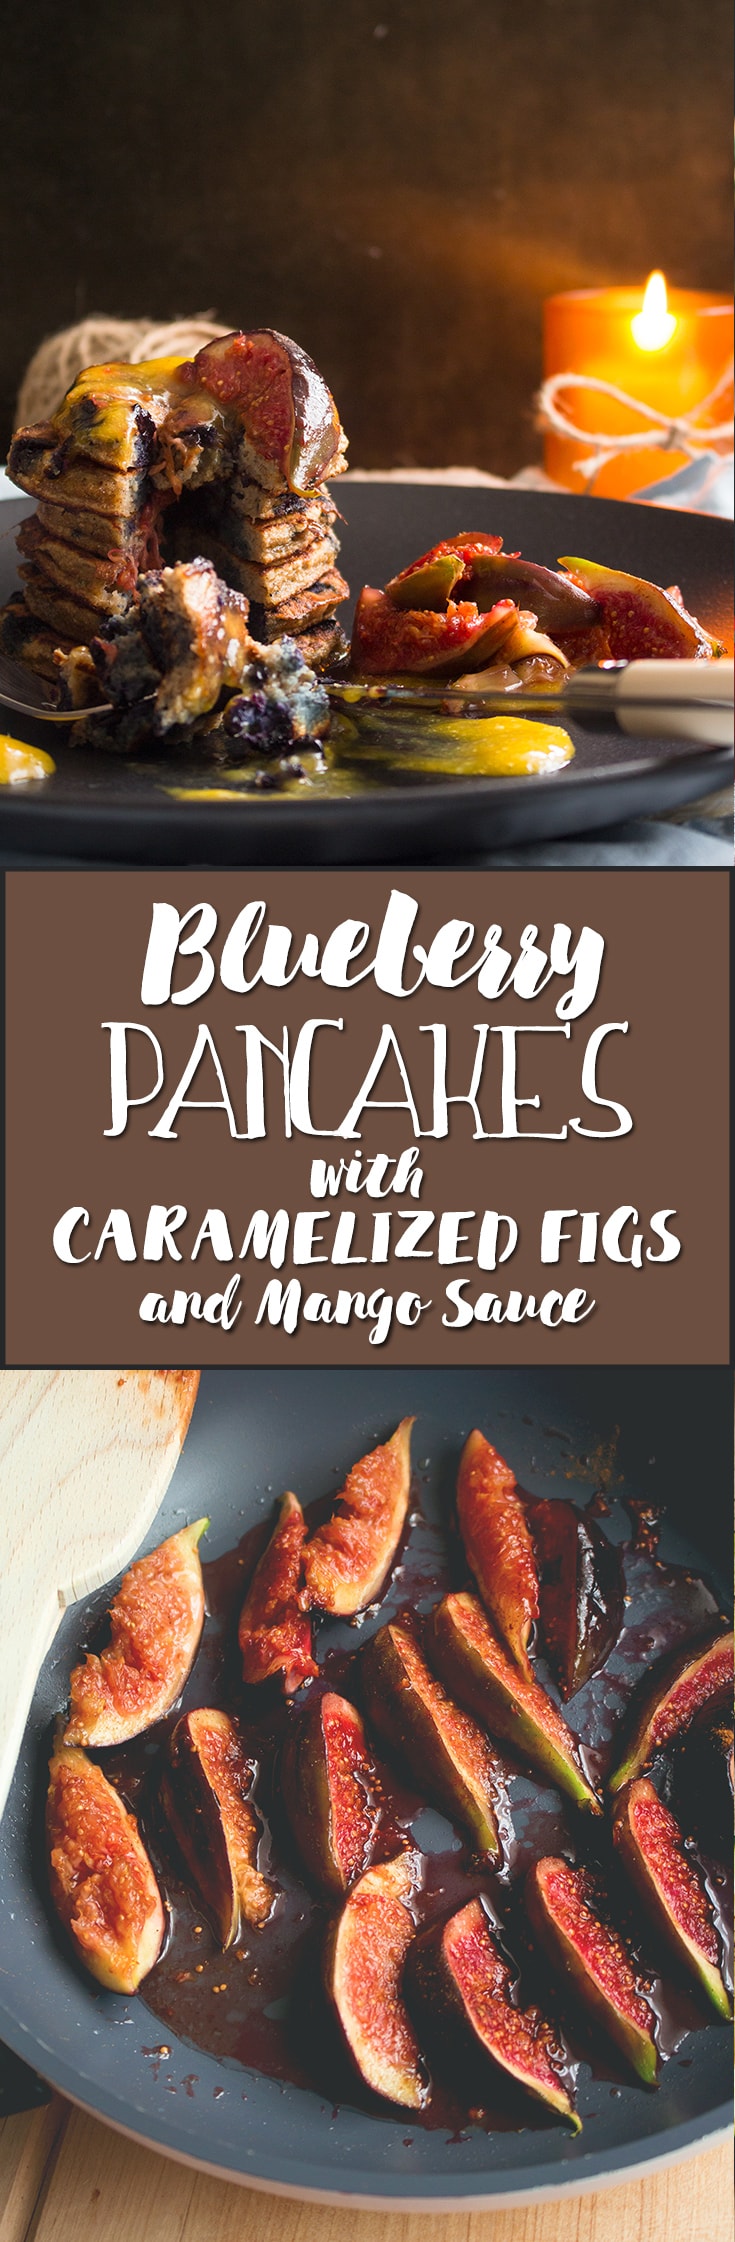 Blueberry Vanilla Pancakes with Caramelized Figs and Mango Sauce - delicious healthy breakfast. I love these! They taste amazing, look fancy, but are really easy to make! Gluten free & dairy free! | thehealthfulideas.com